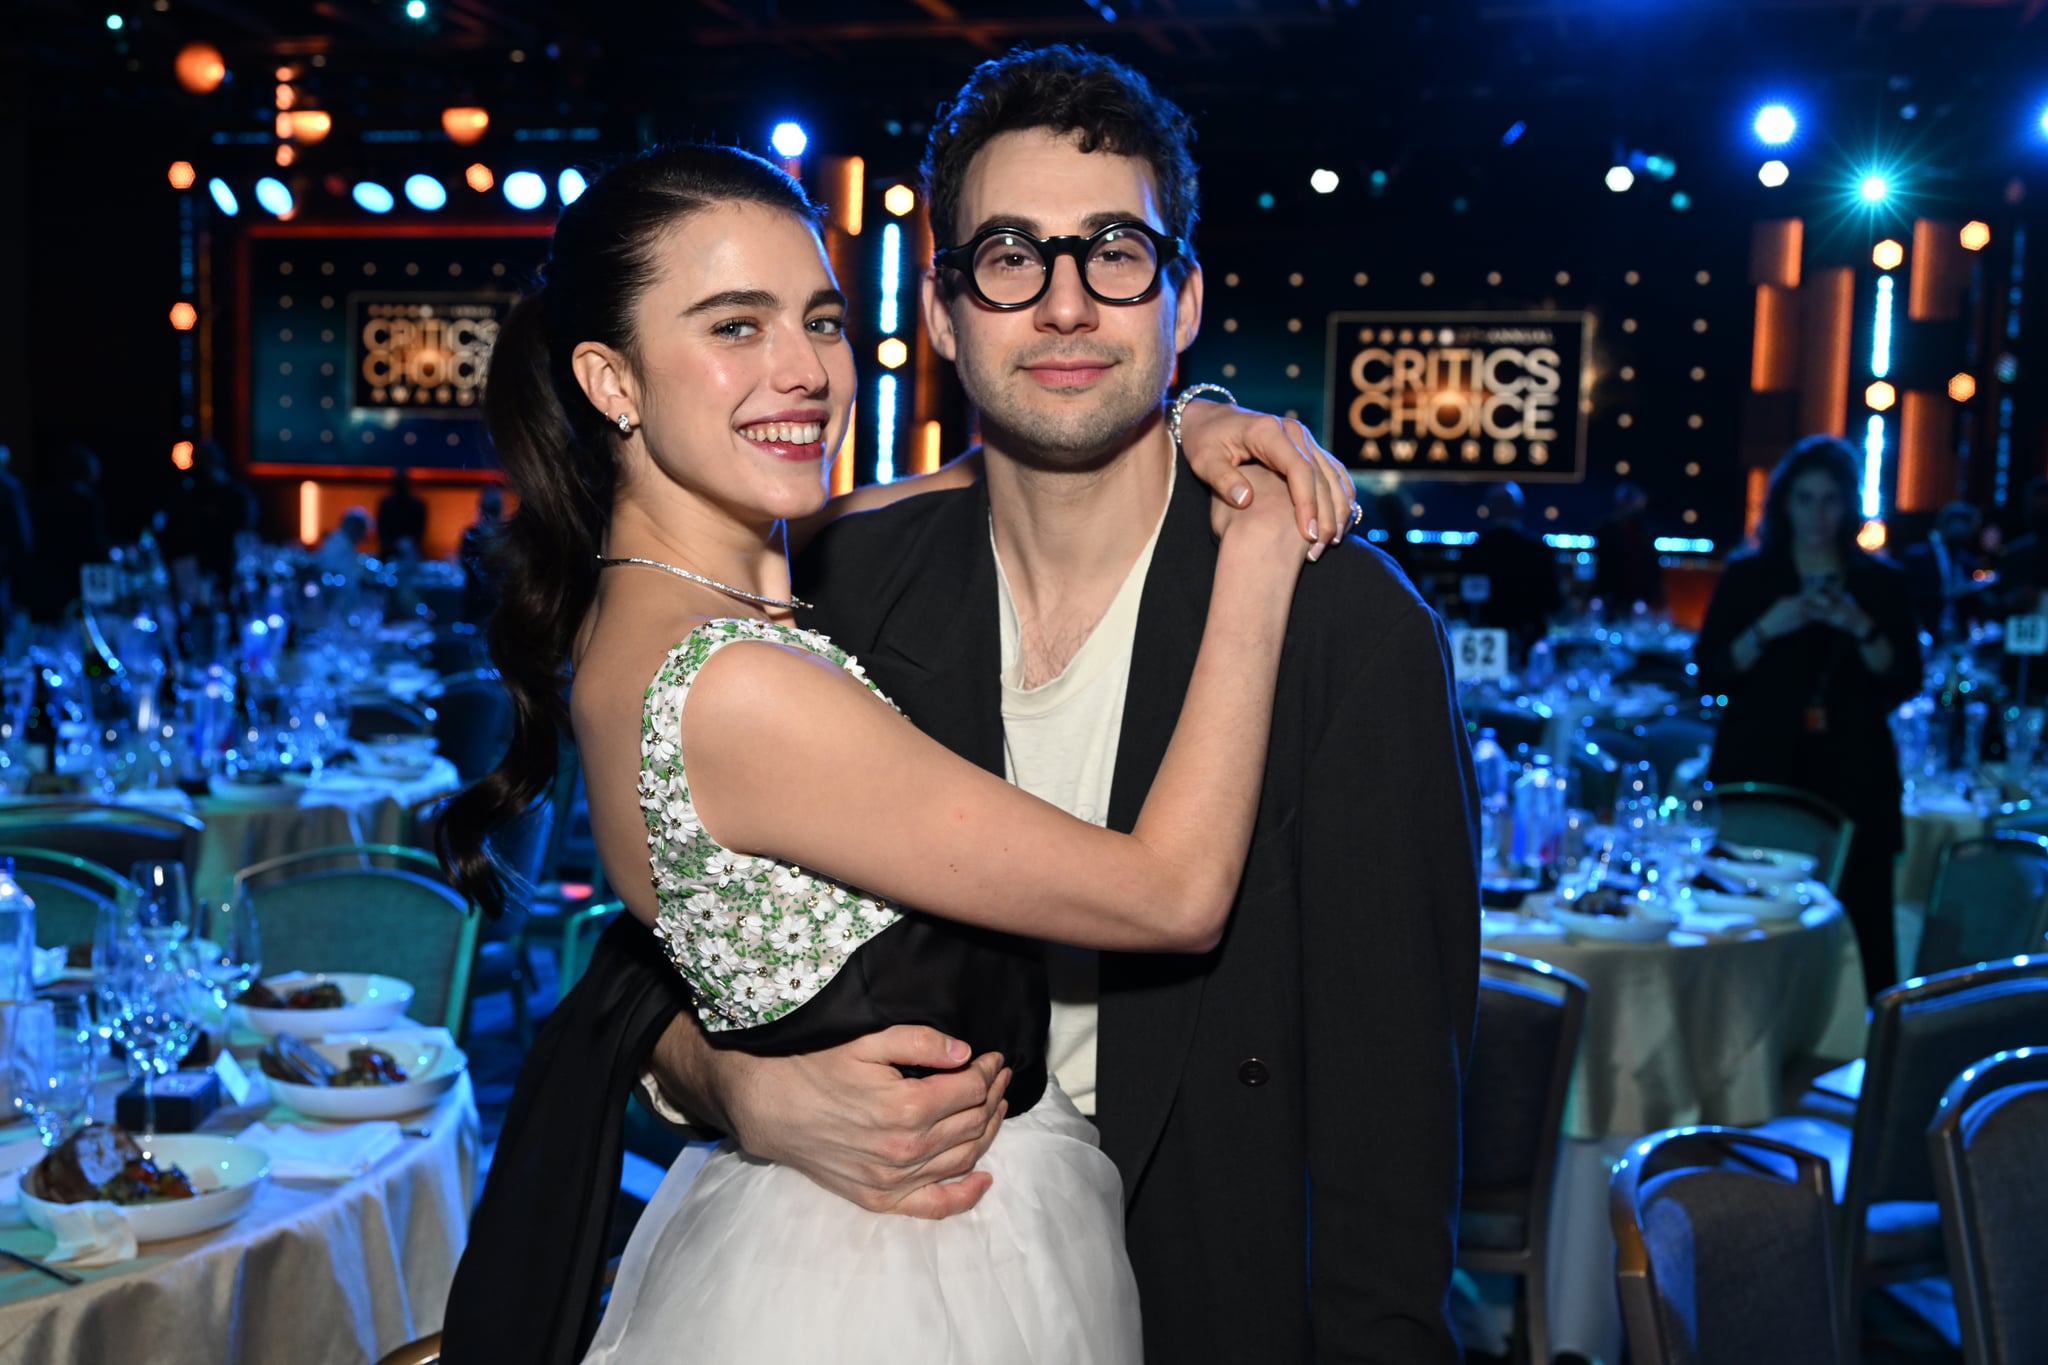 LOS ANGELES, CALIFORNIA - MARCH 13: Margaret Qualley and Jack Antonoff with Champagne Collet & OBC Wines as they celebrate the 27th Annual Critics Choice Awards at Fairmont Century Plaza on March 13, 2022 in Los Angeles, California. (Photo by Michael Kovac/Getty Images for Champagne Collet & OBC Wines)